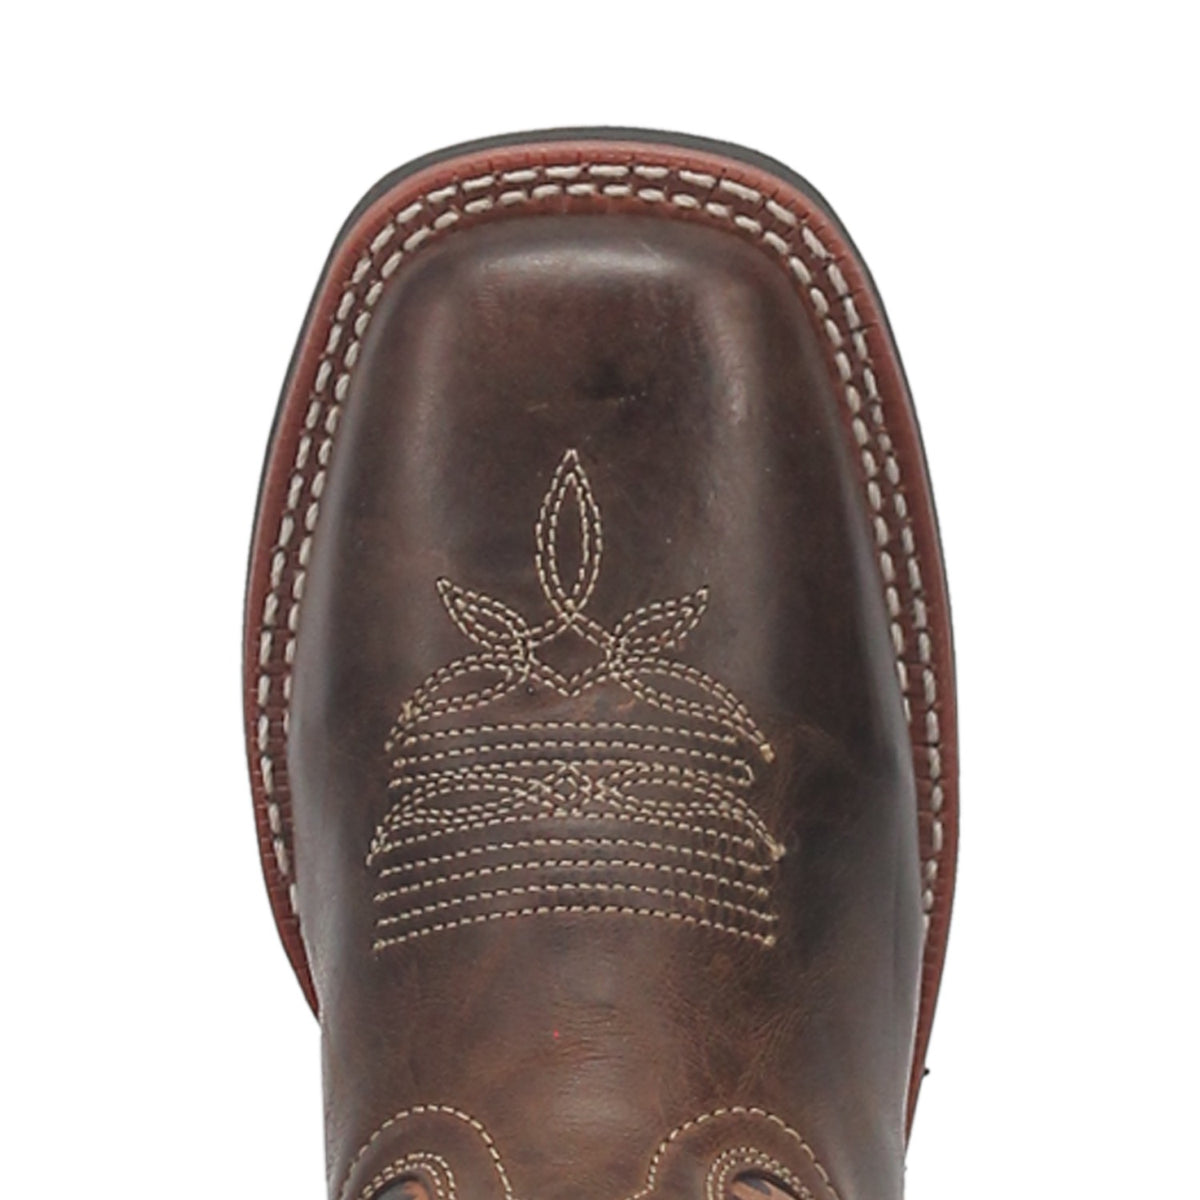 ASTRAS LEATHER BOOT Cover